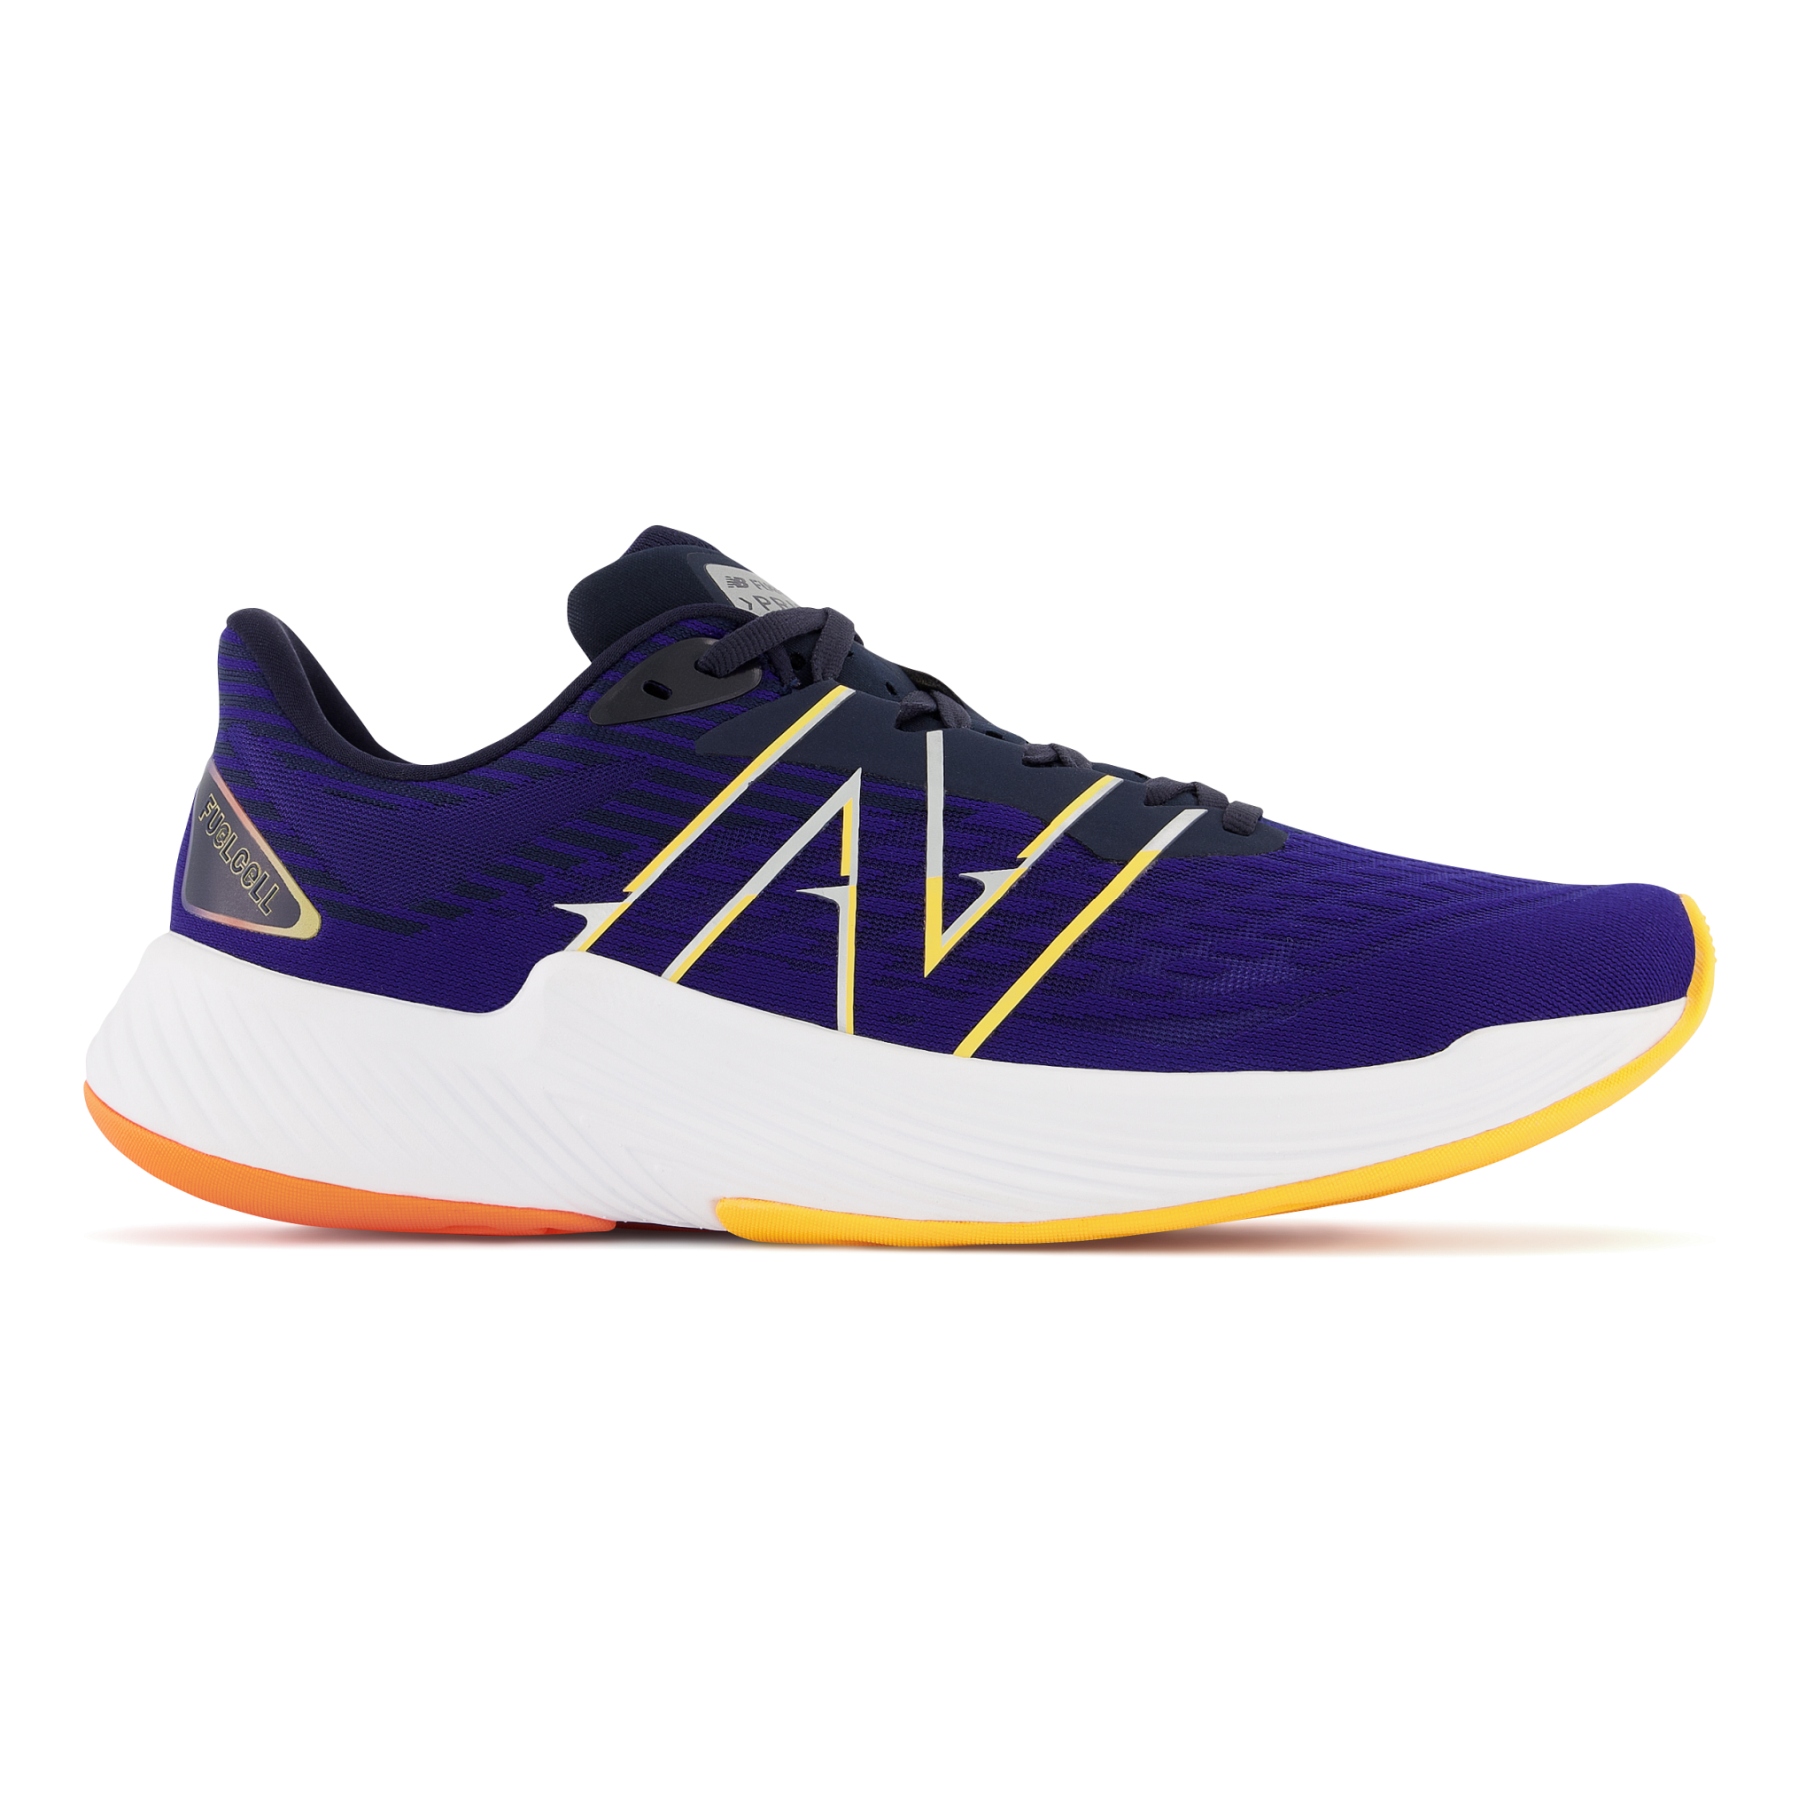 Immagine di New Balance FuelCell Prism v2 Running Shoes - Navy